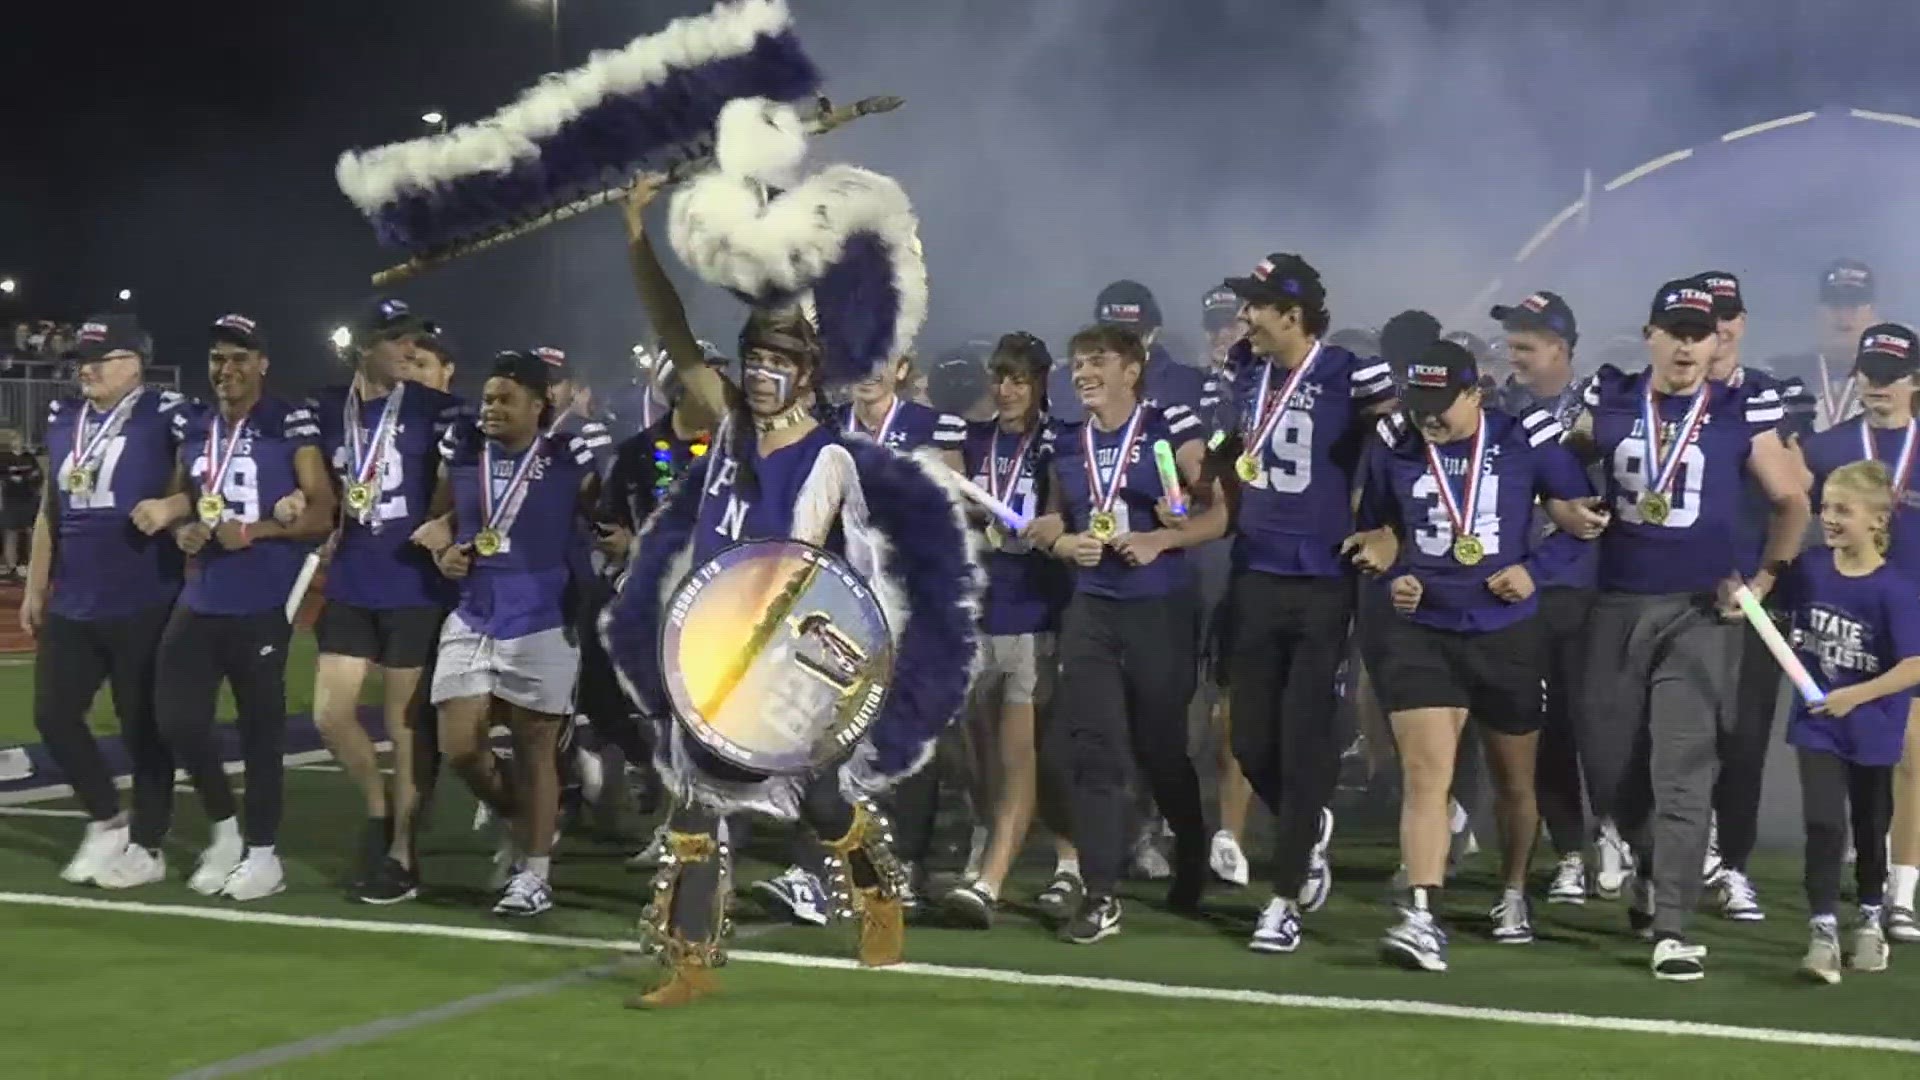 For the first time since 1975, the Texas State football championship came back to Port Neches-Groves High School.